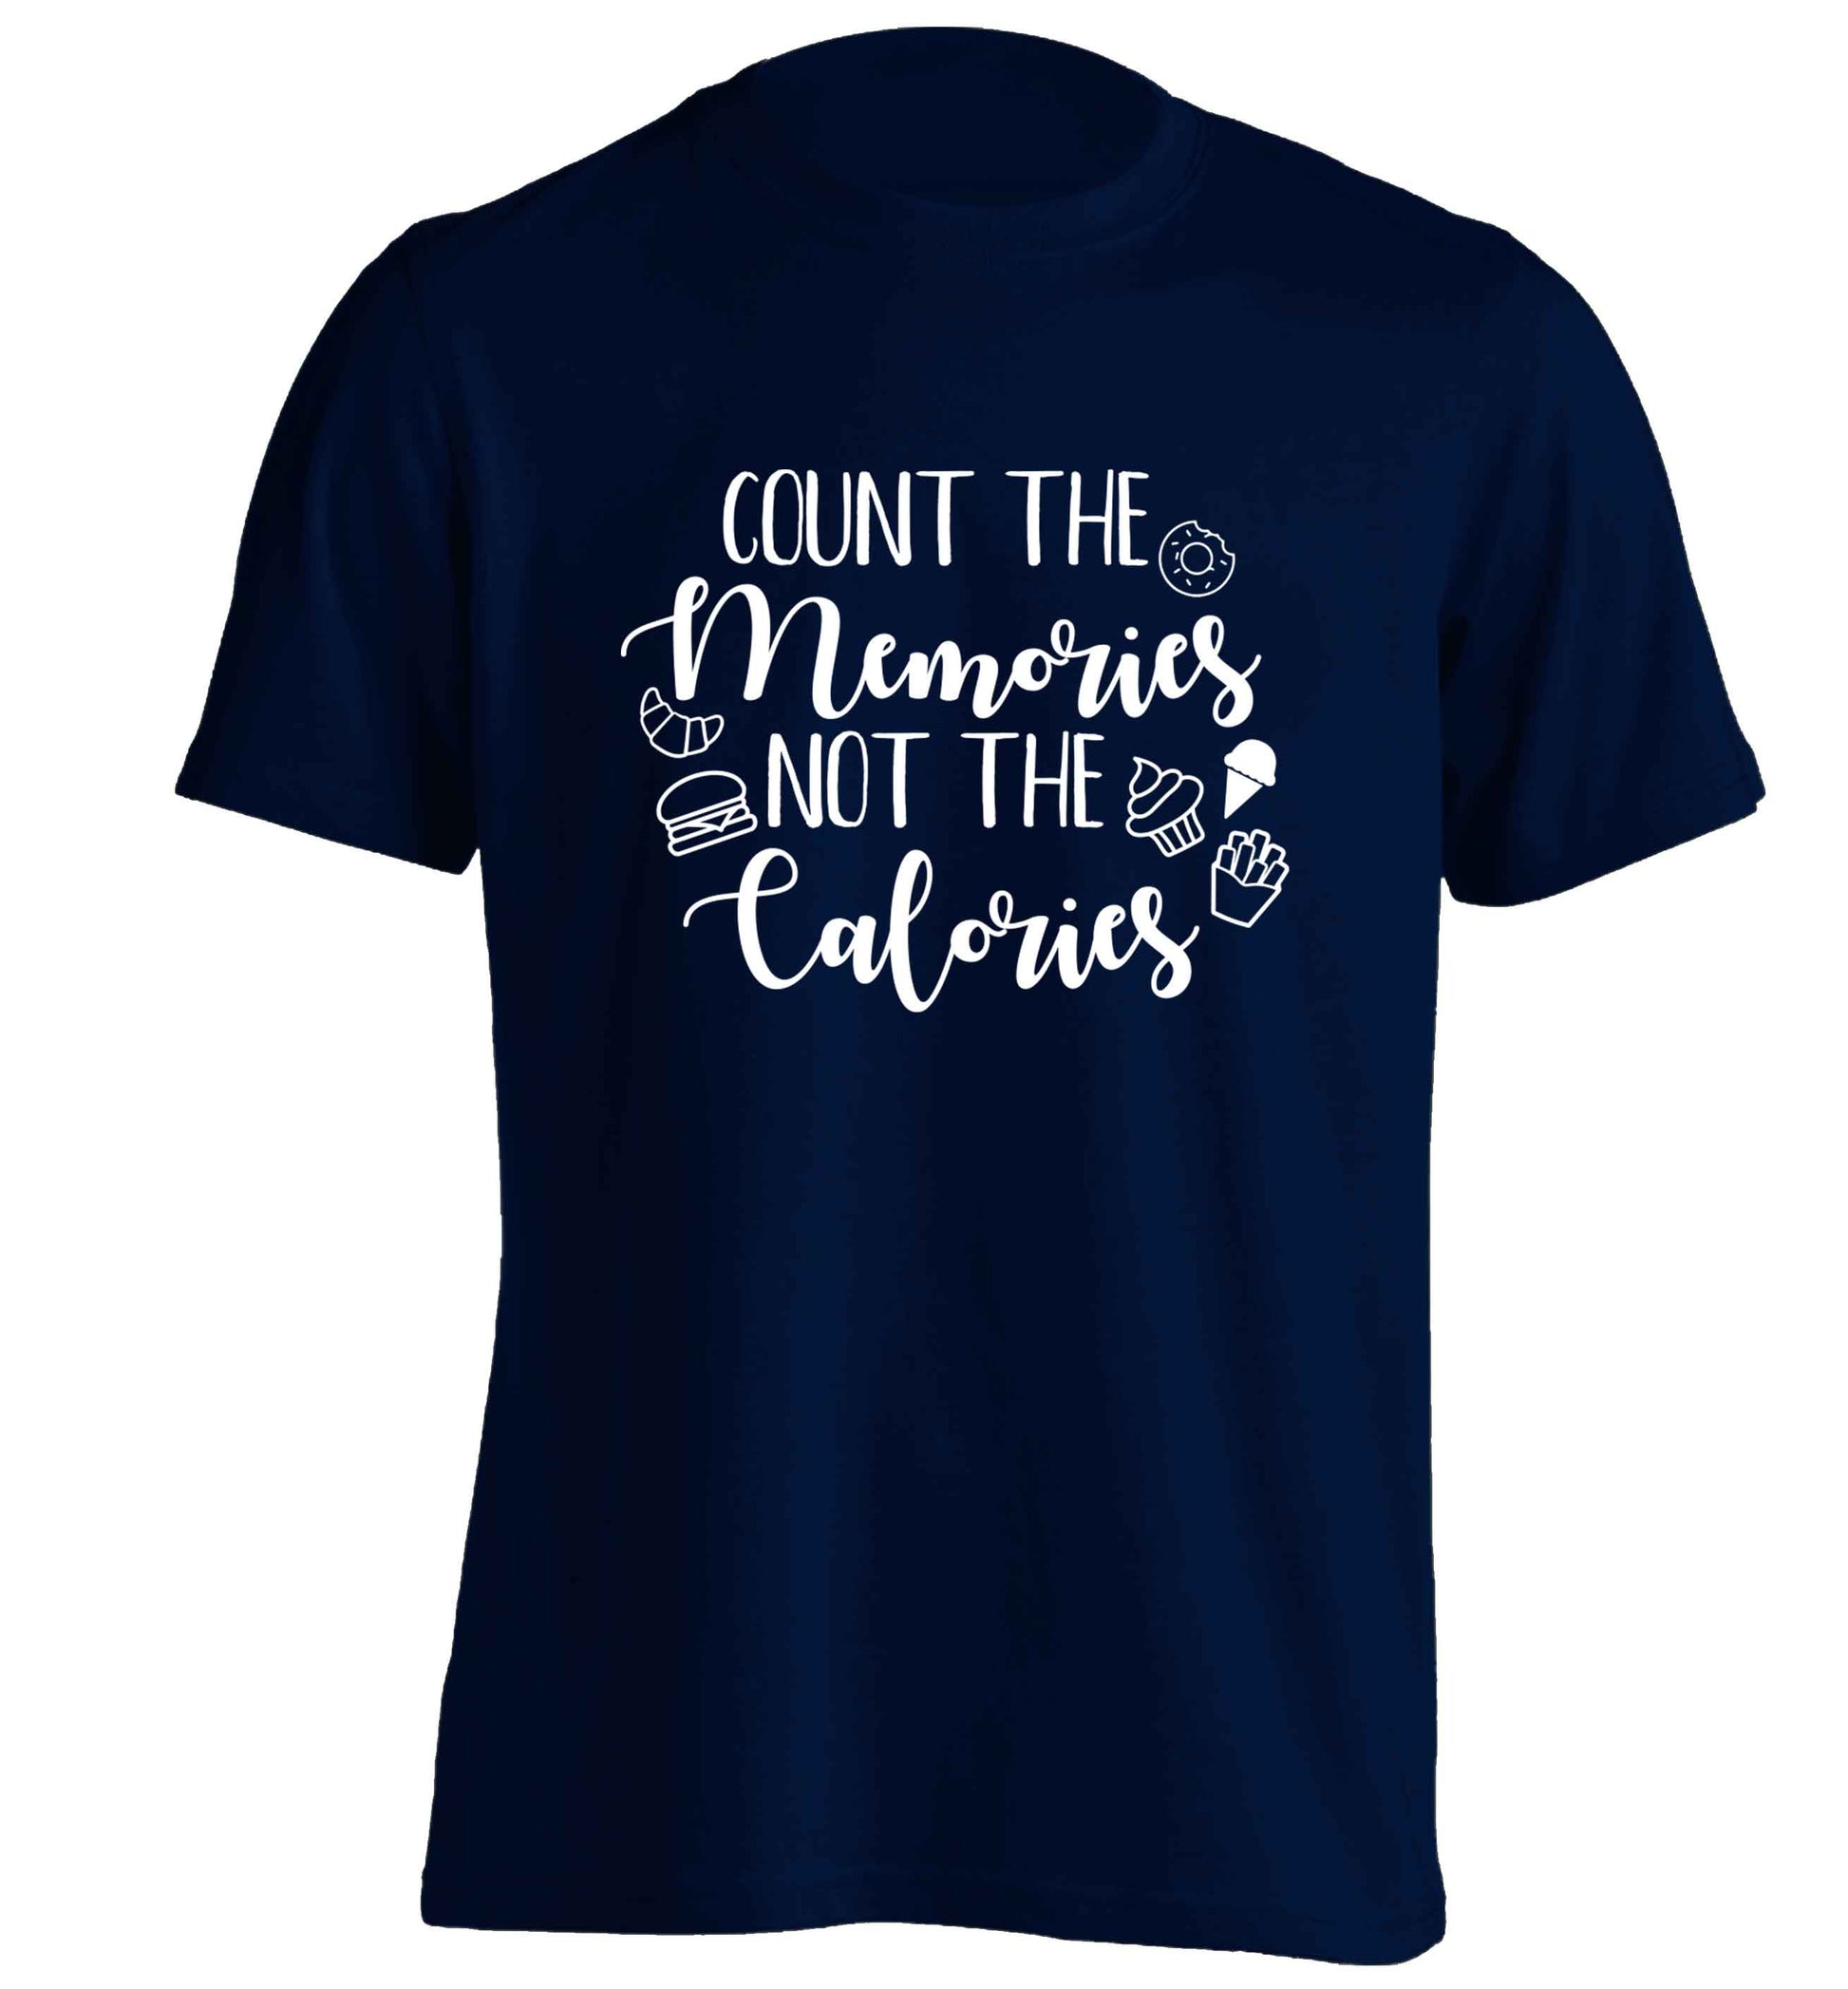 Count the memories not the calories adults unisex navy Tshirt 2XL